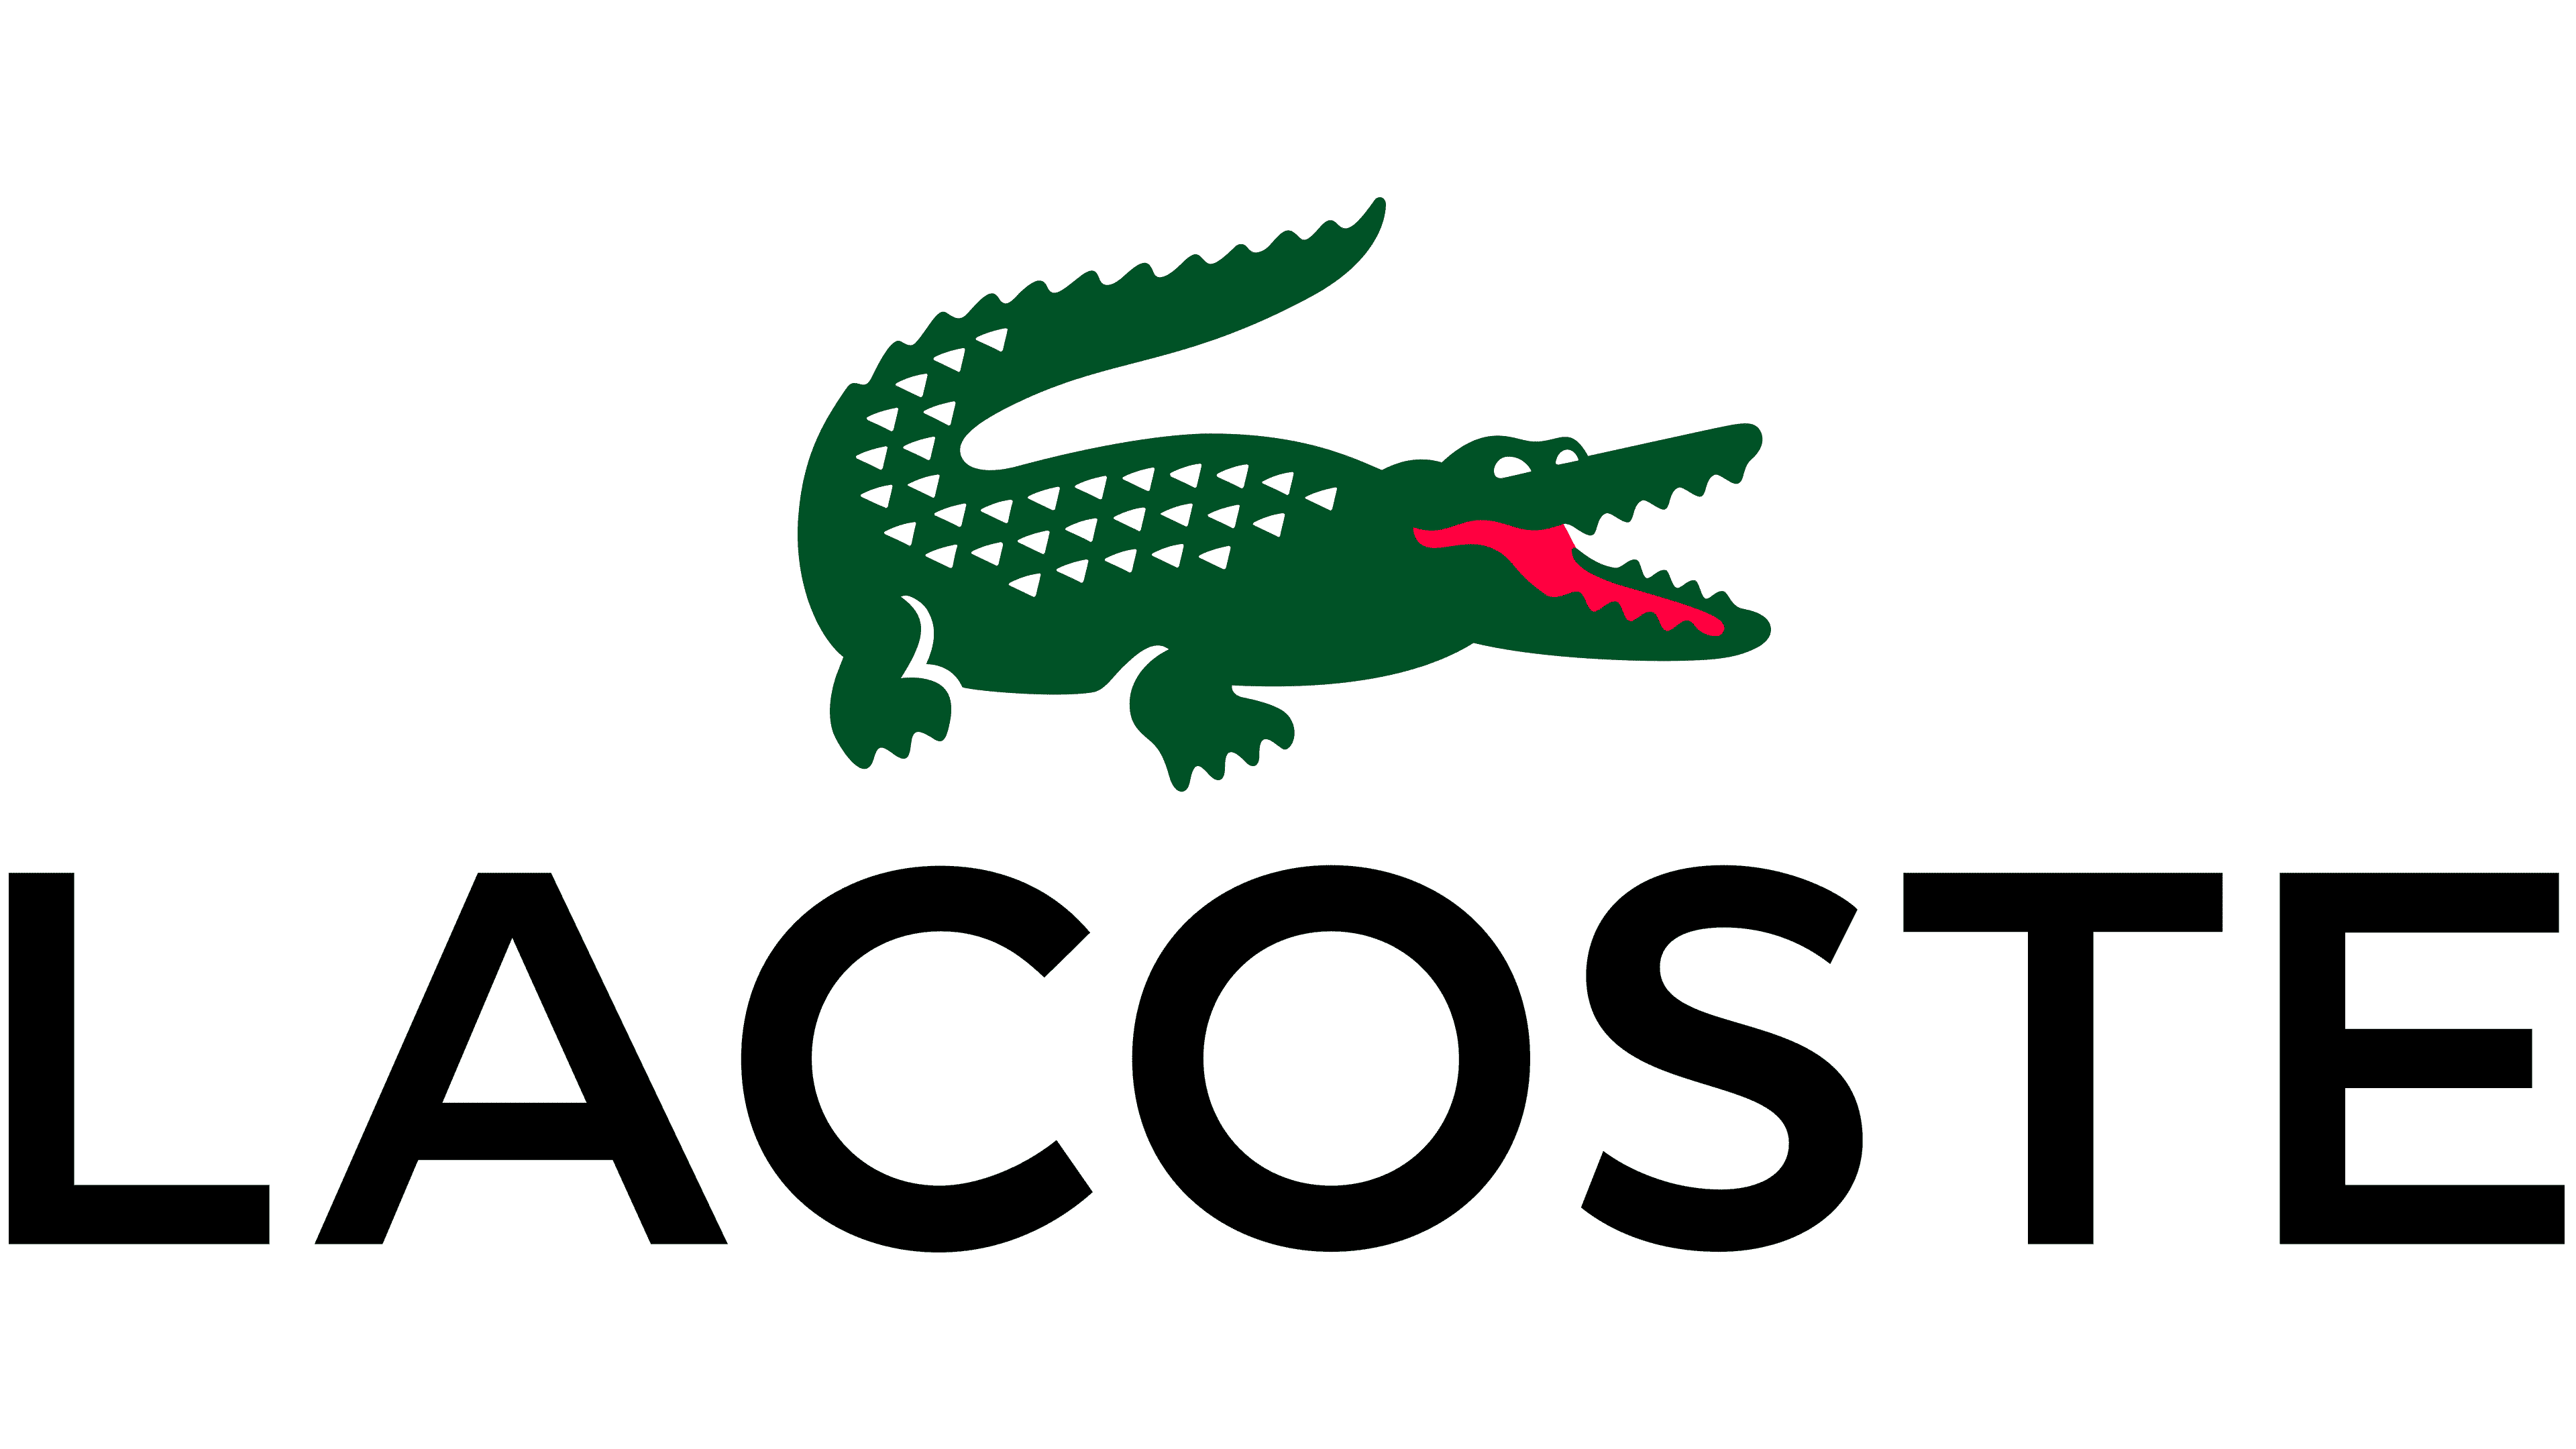 Lacoste and meaning, history, PNG, brand